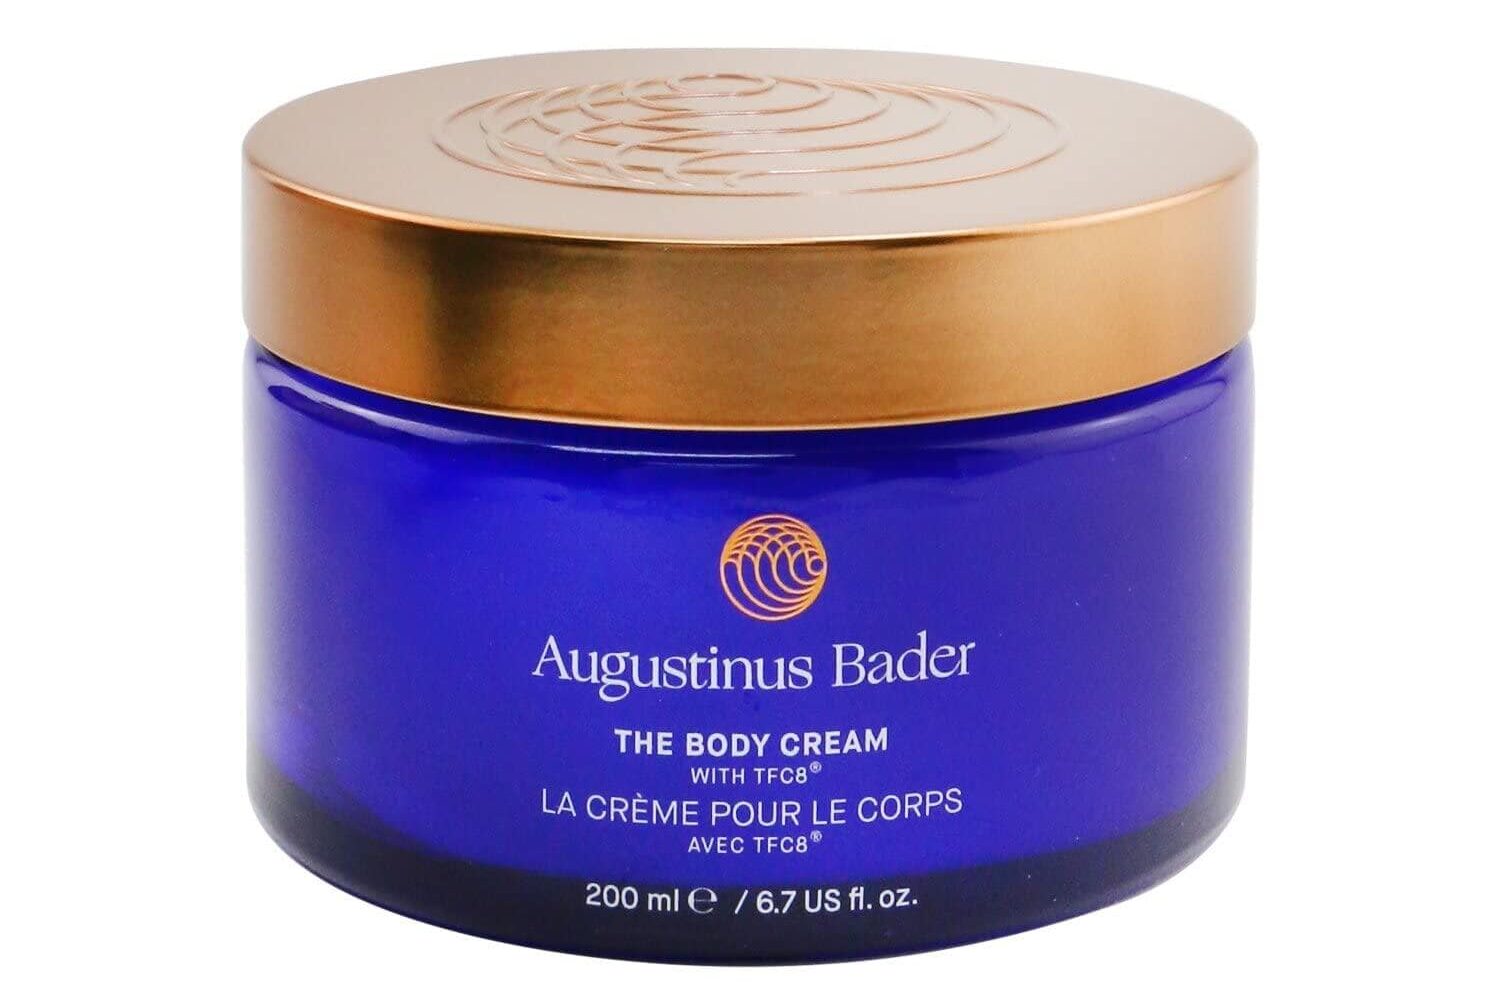 premium skincare, Augustinus Bader's The Body Cream, a must-have among body lotions, goes beyond with its high-tech formula, transcending typical moisturization.
